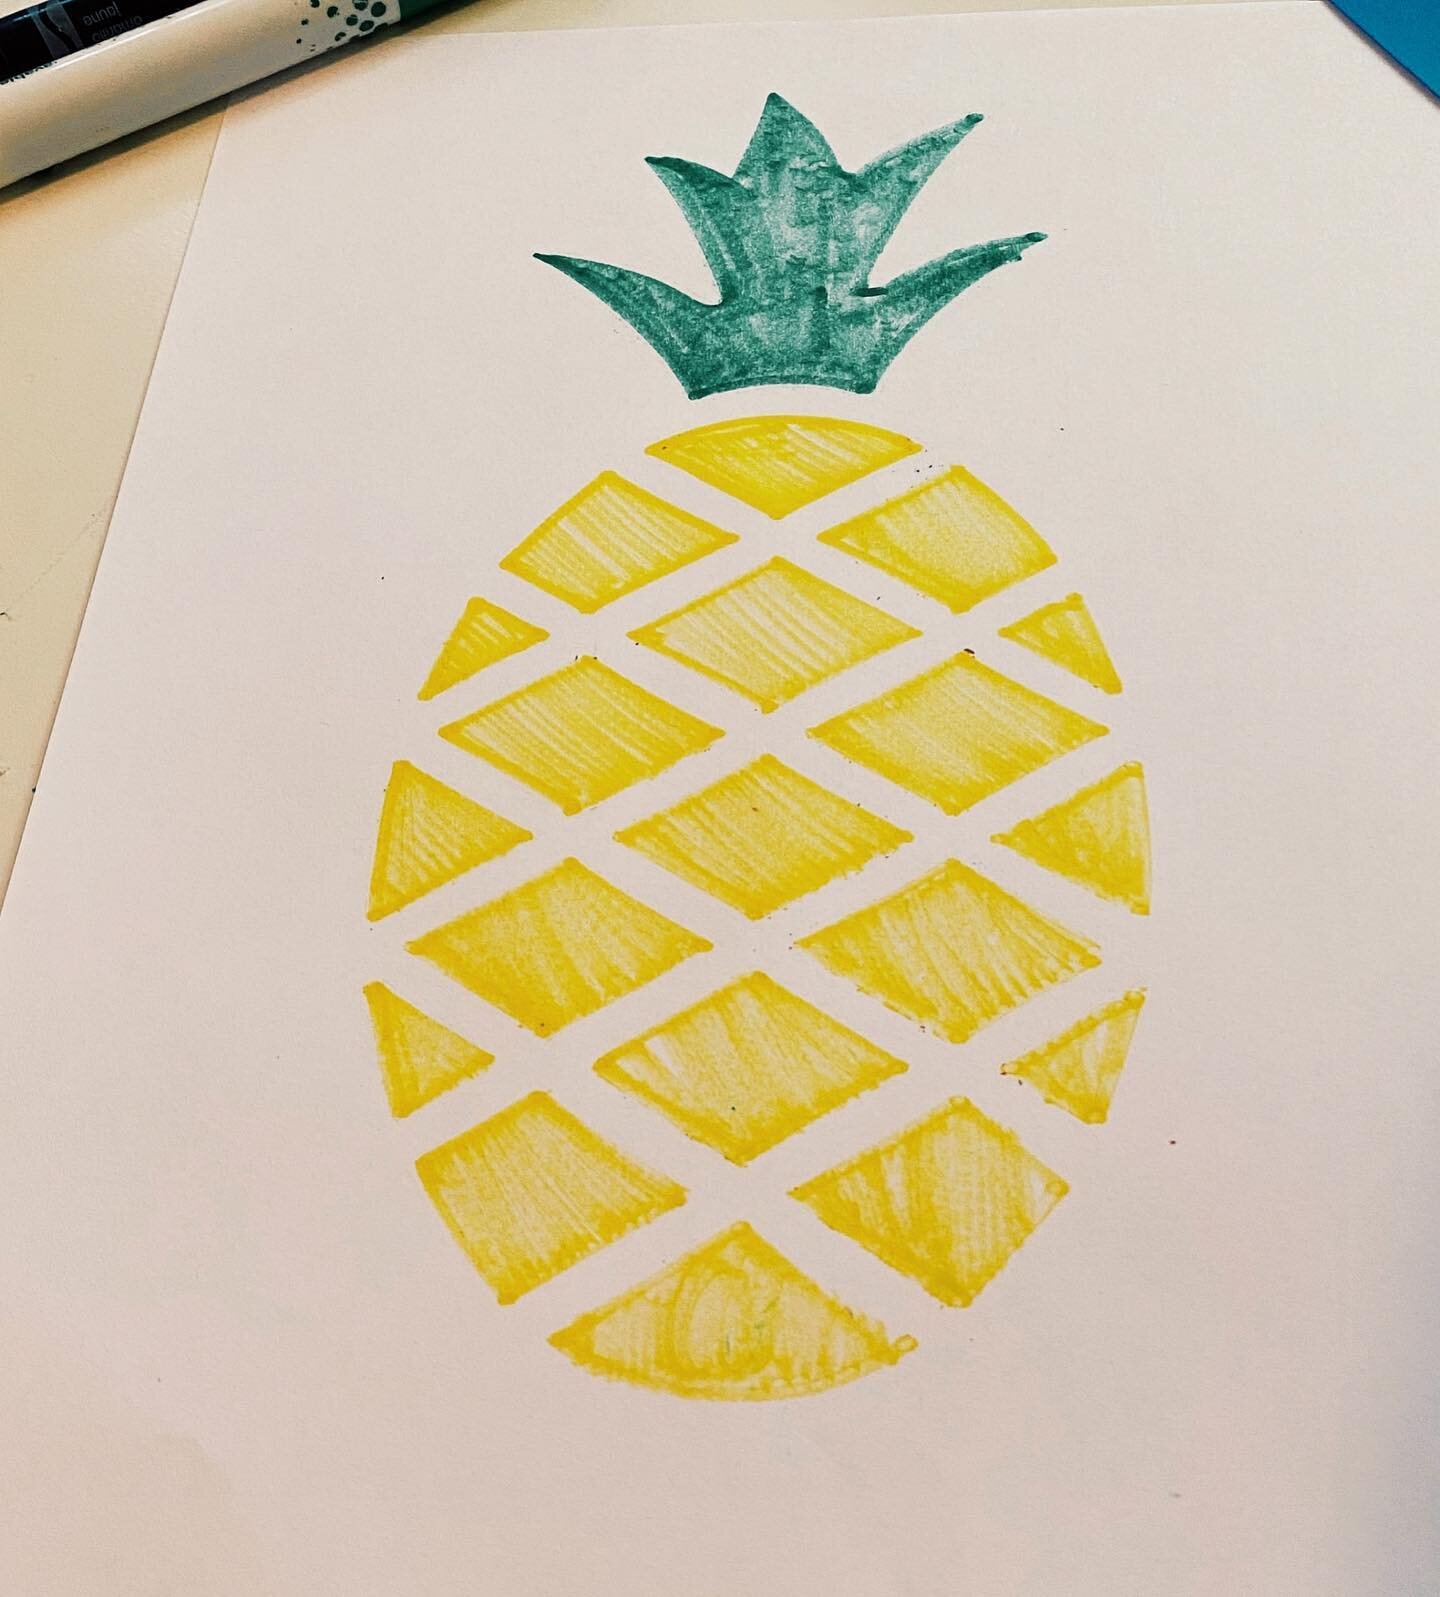 Be a pineapple - stand tall, wear a crown, and be sweet inside. 
.
.
.
To them, it&rsquo;s just coloring, but we know it&rsquo;s an exercise in mindfulness tracing the stencil and coloring it in.
.
#kidsyoga #kidsyogateacher #chicagokidsplay #mindful